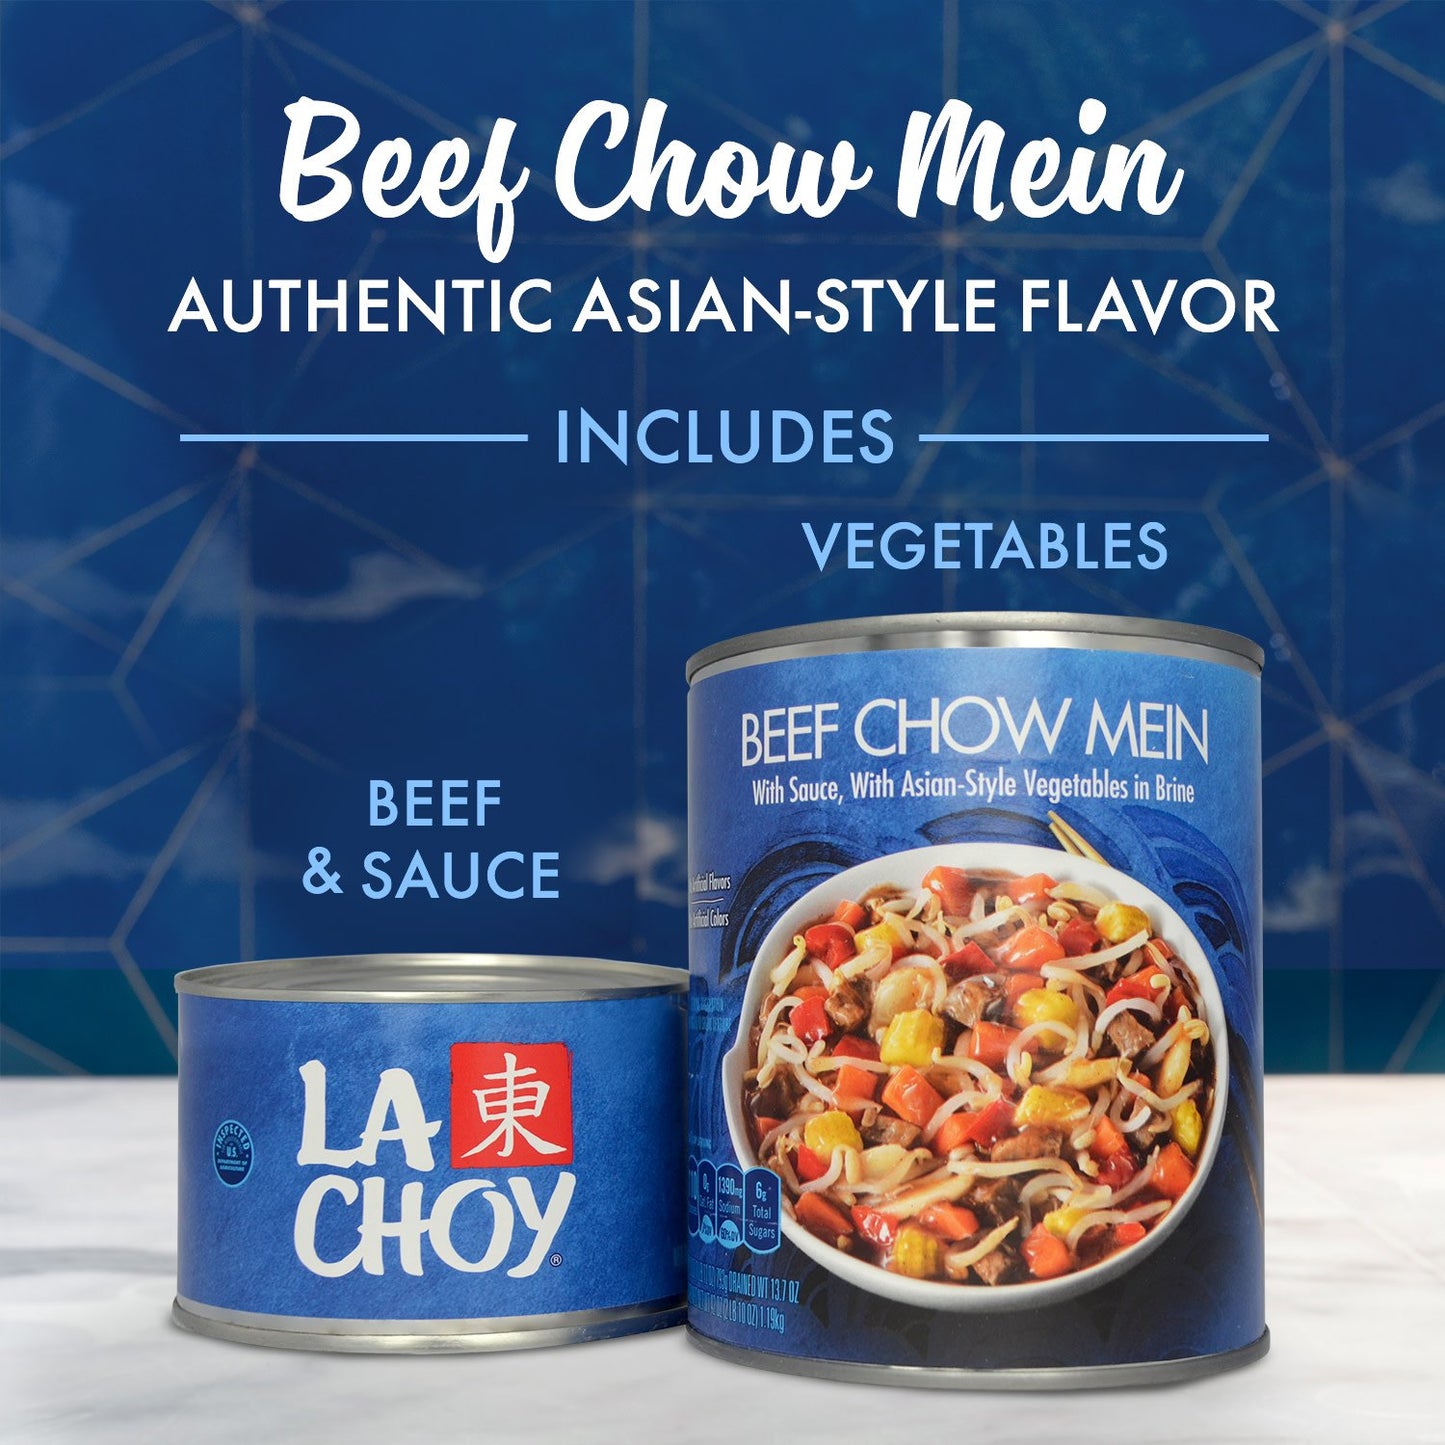 La Choy Beef Chow Mein With Sauce & Asian-style Vegetables 42 oz.